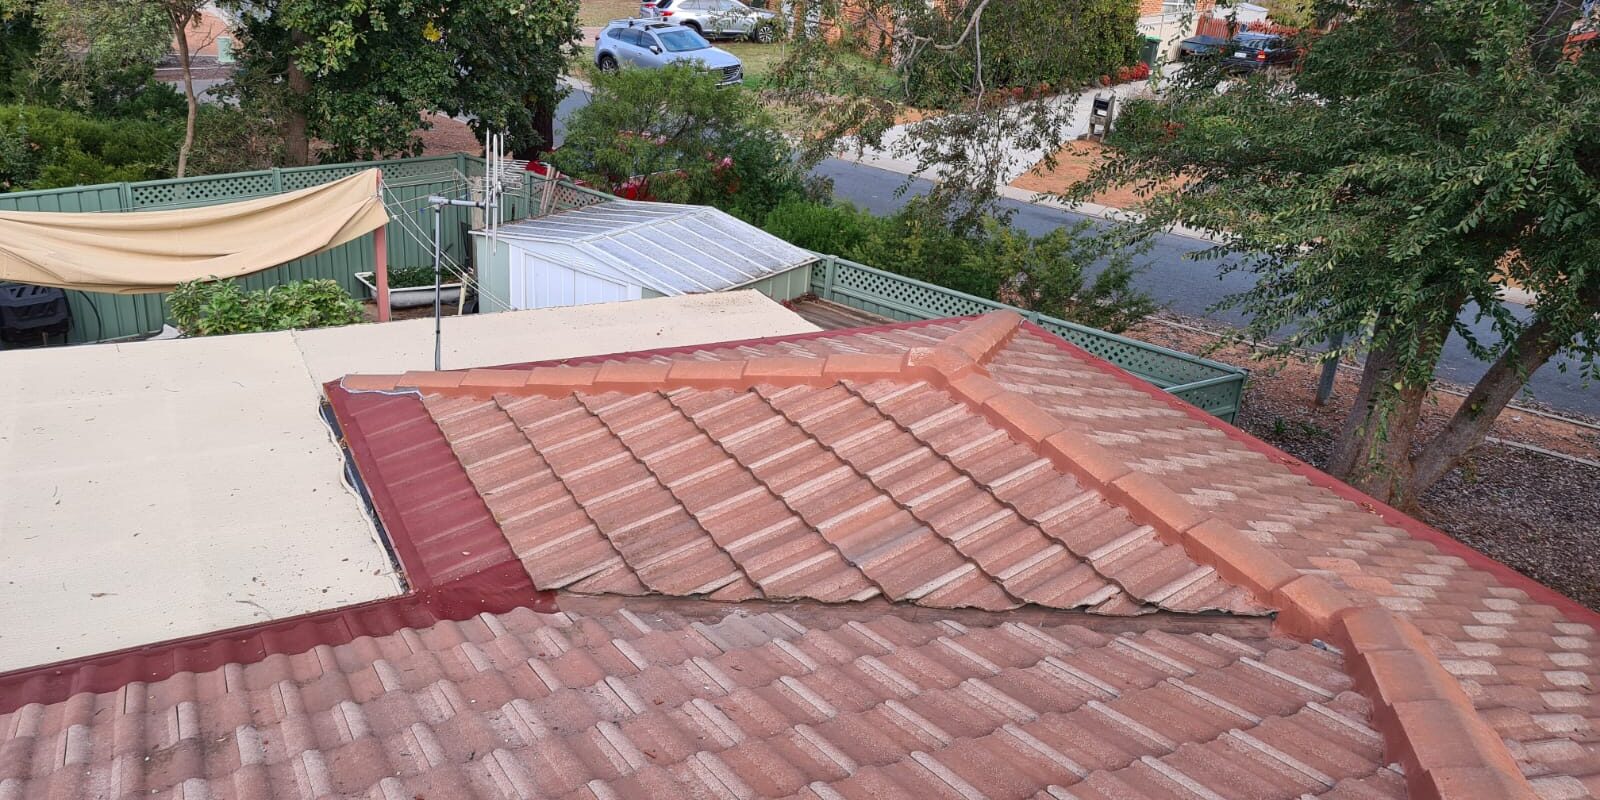 Affordable Canberra Roofing Services: Why Choose Us for Your Roofing Needs